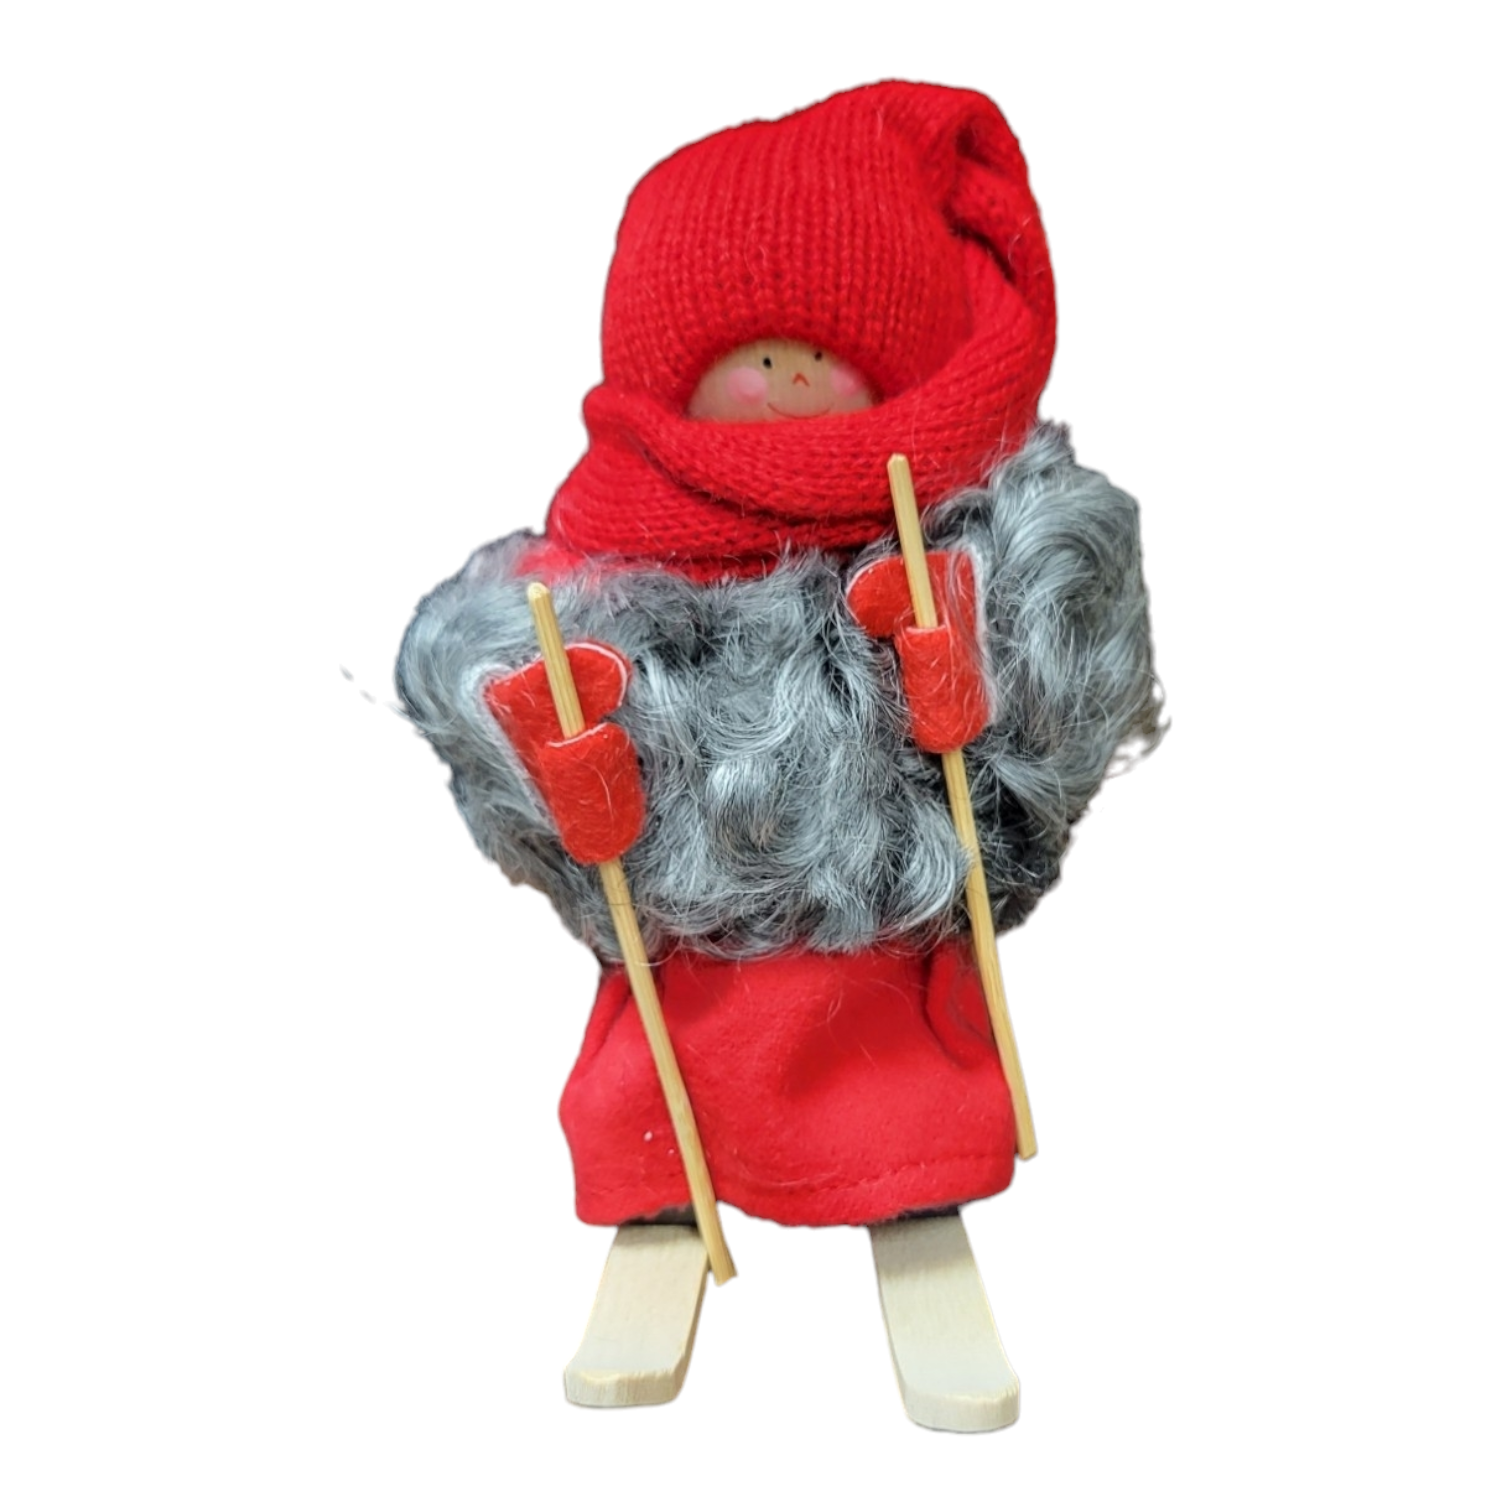 Figurine: Tomte on Skis, Red